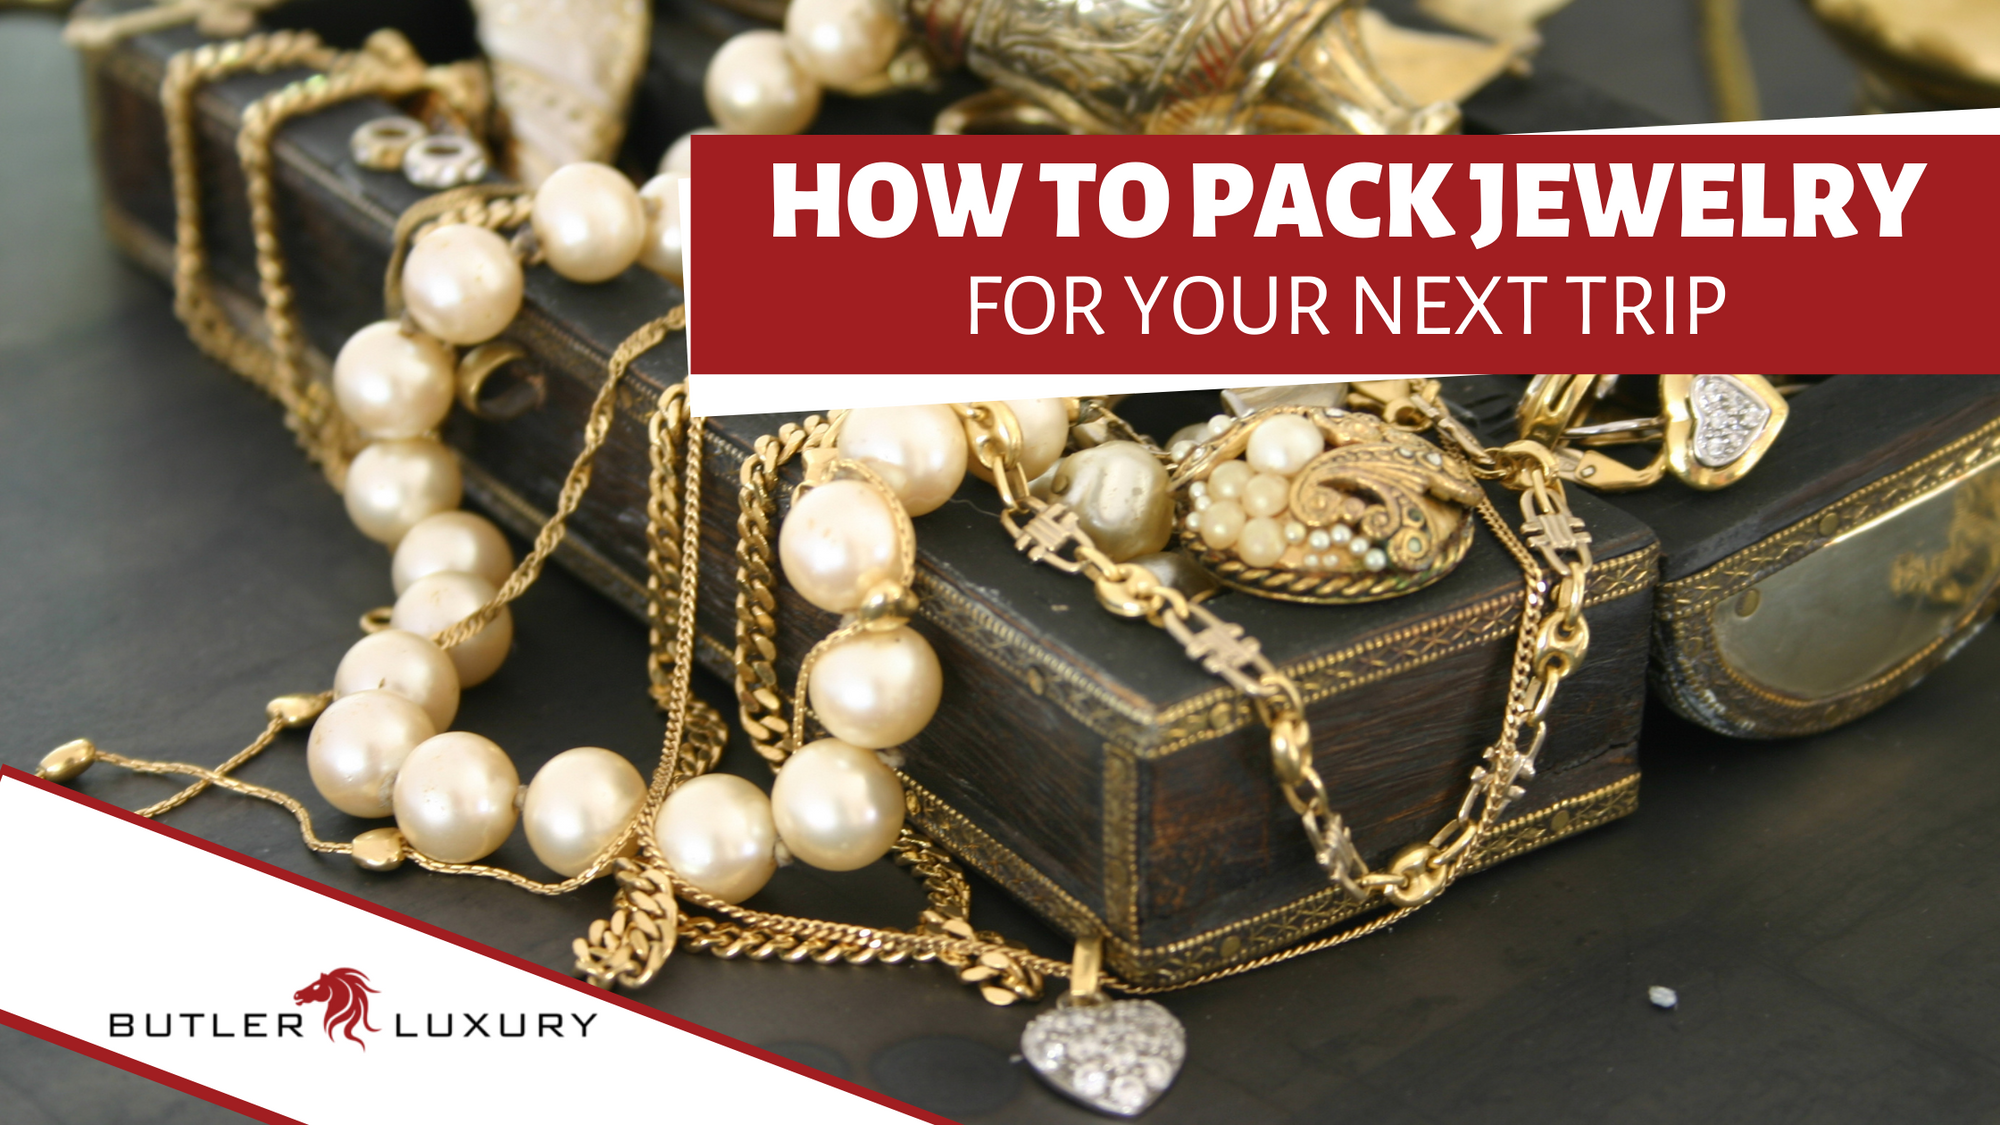 Don't Leave it at Home! Learn How to Pack Jewelry for Your Next Trip